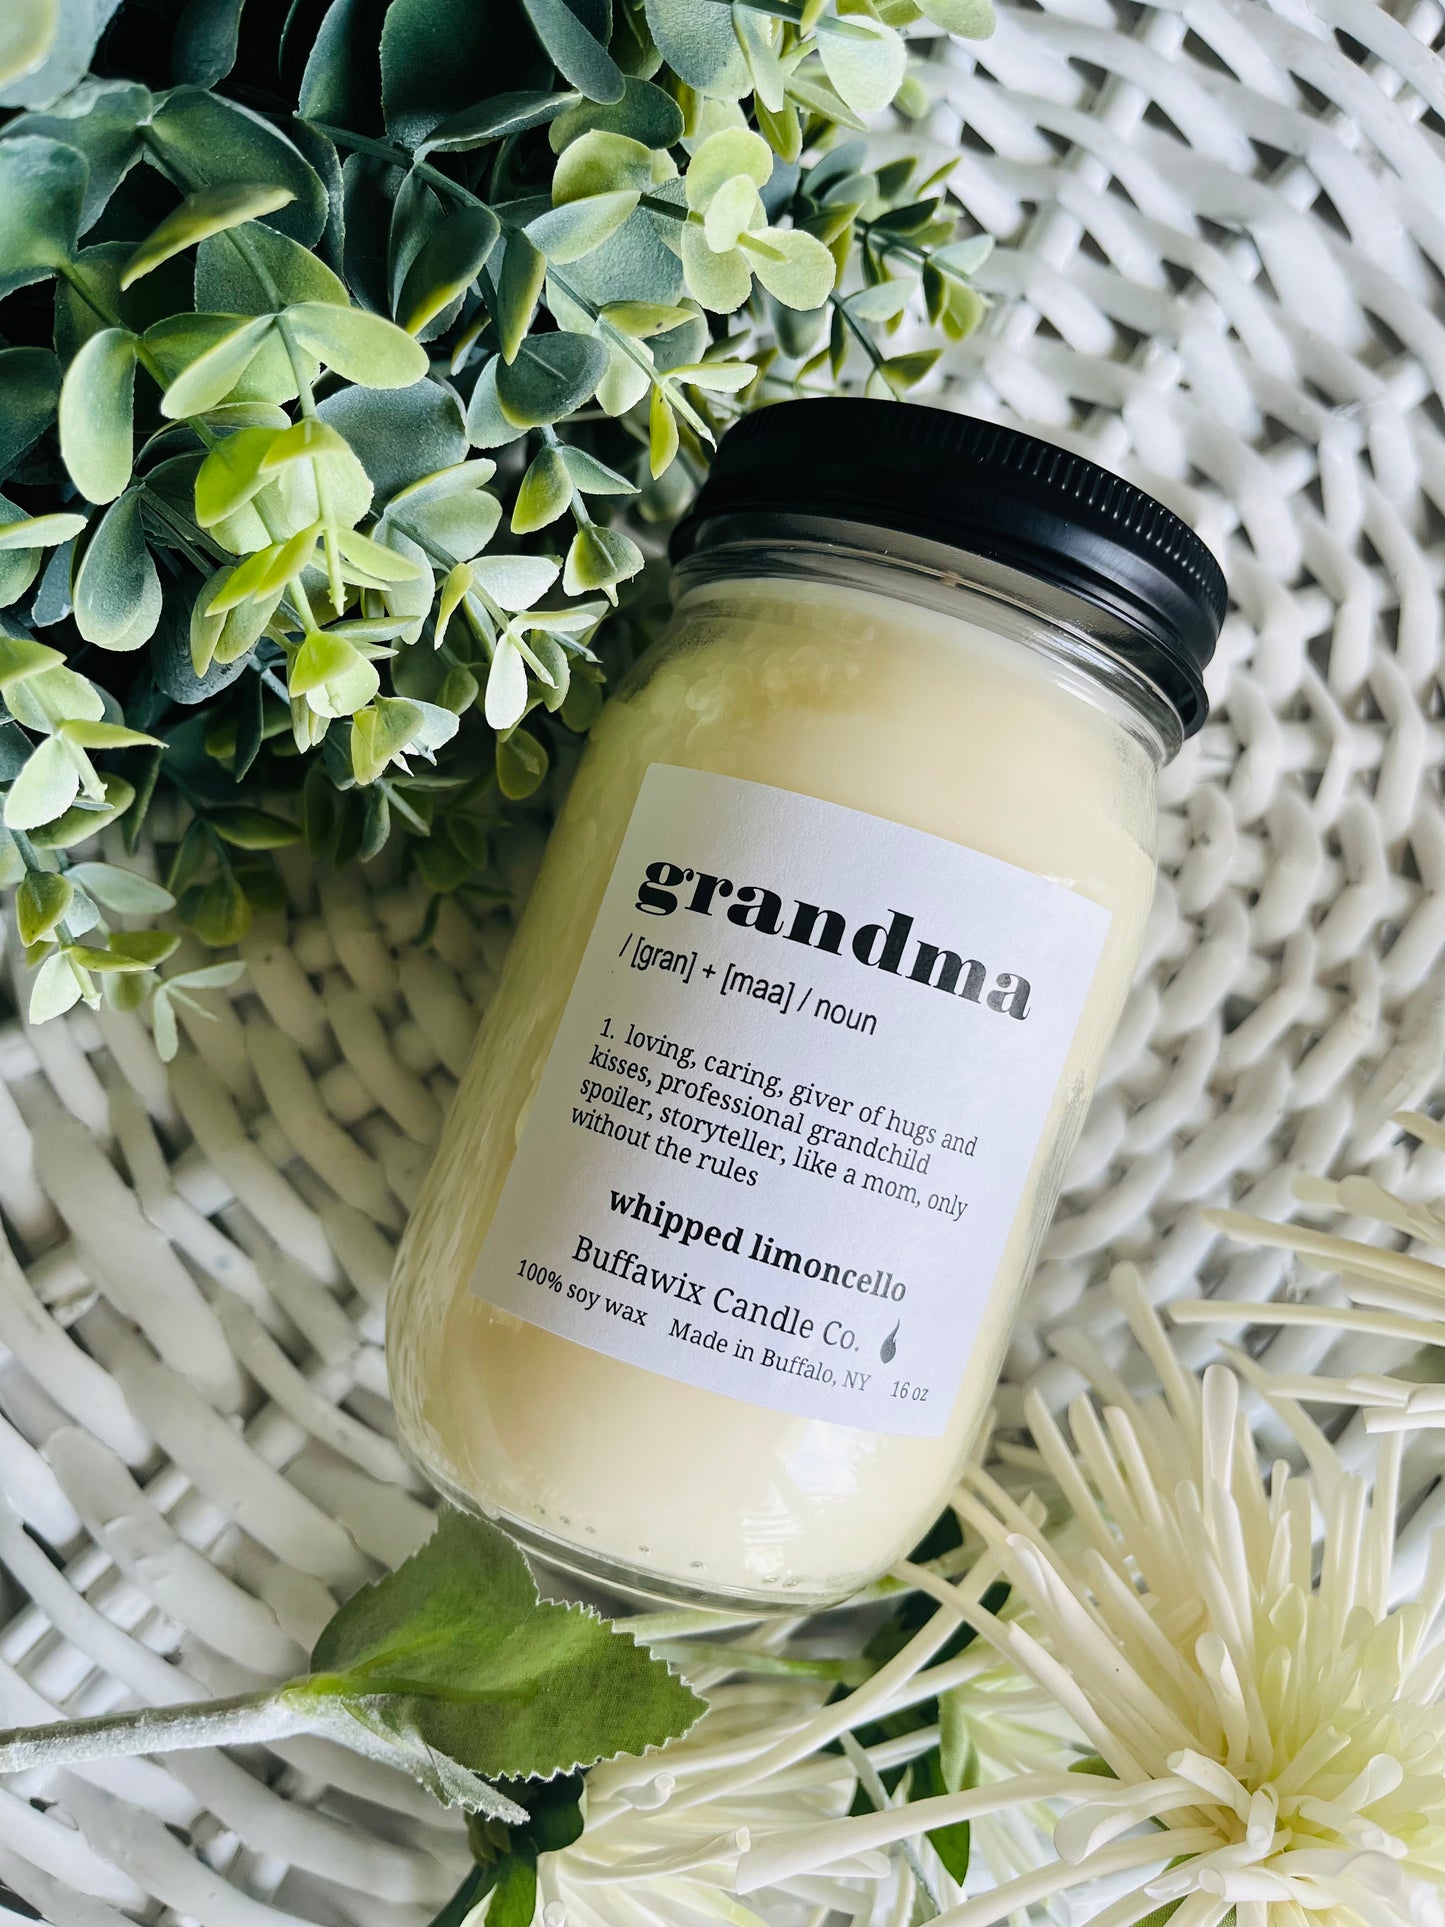 St. John’s fundraiser 16oz Grandma definition whipped limoncello pure soy candle